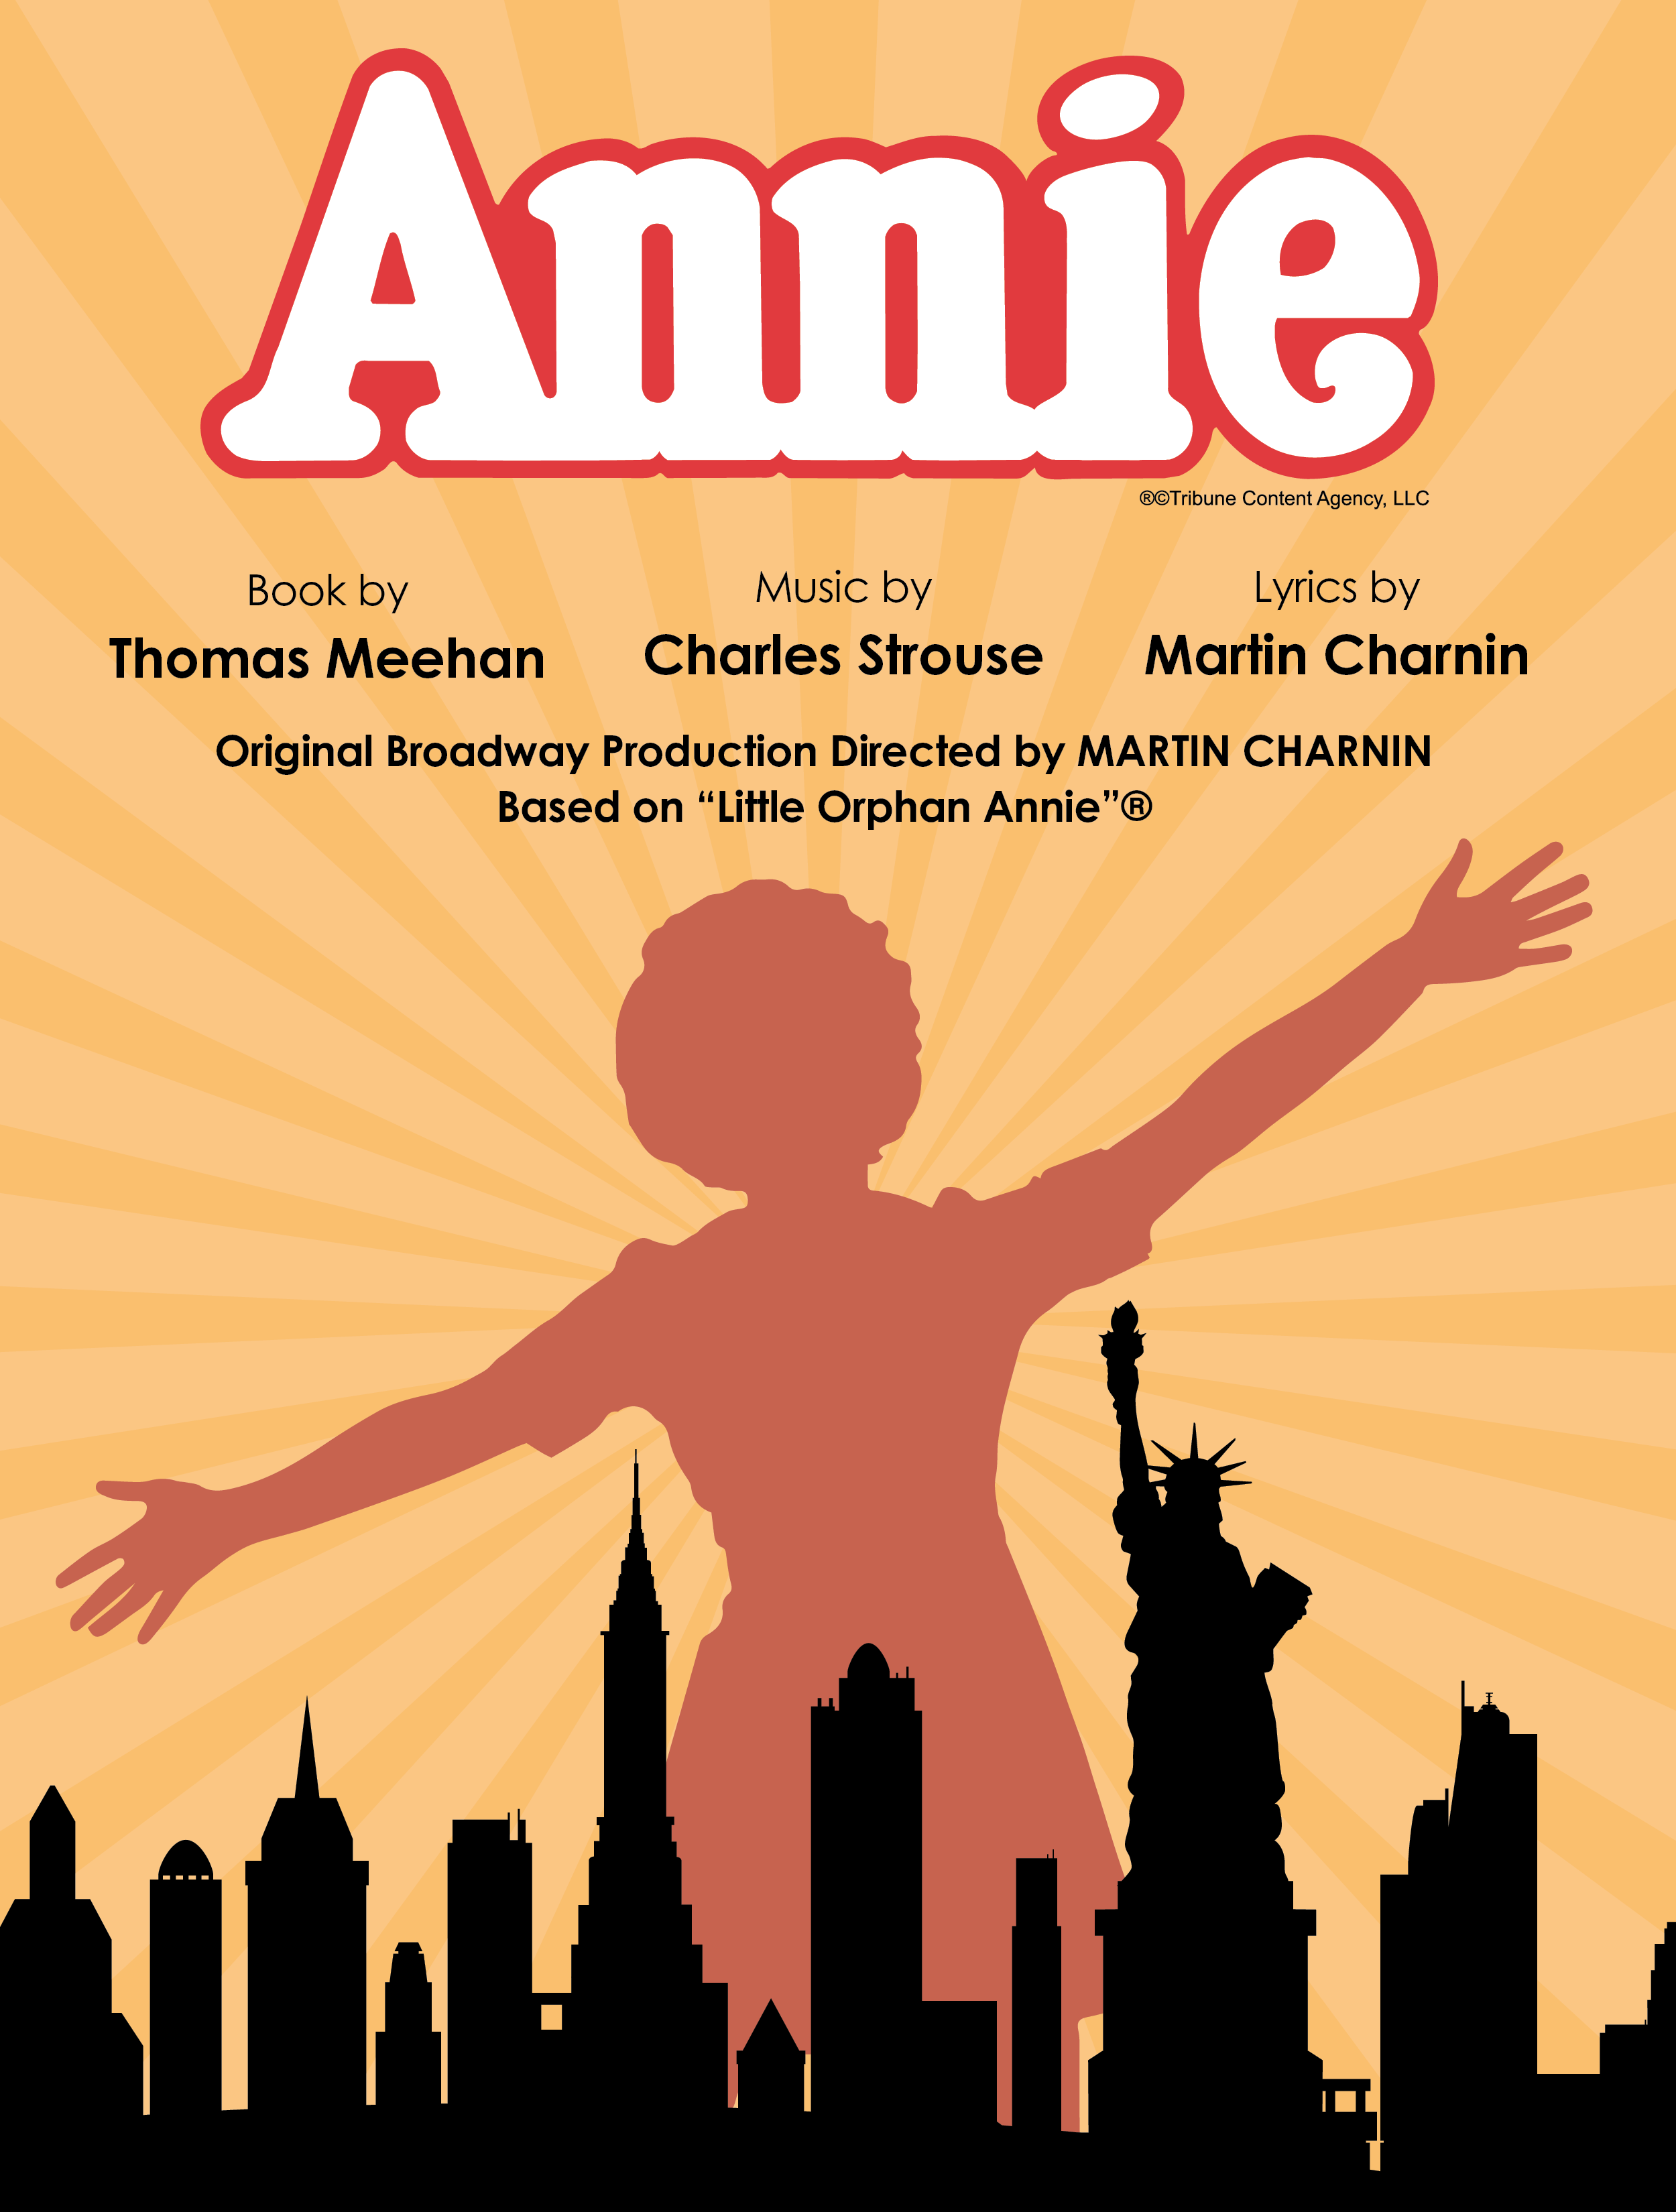 A silhouette of little orphan Annie behind a silhouette of the New York City skyline.